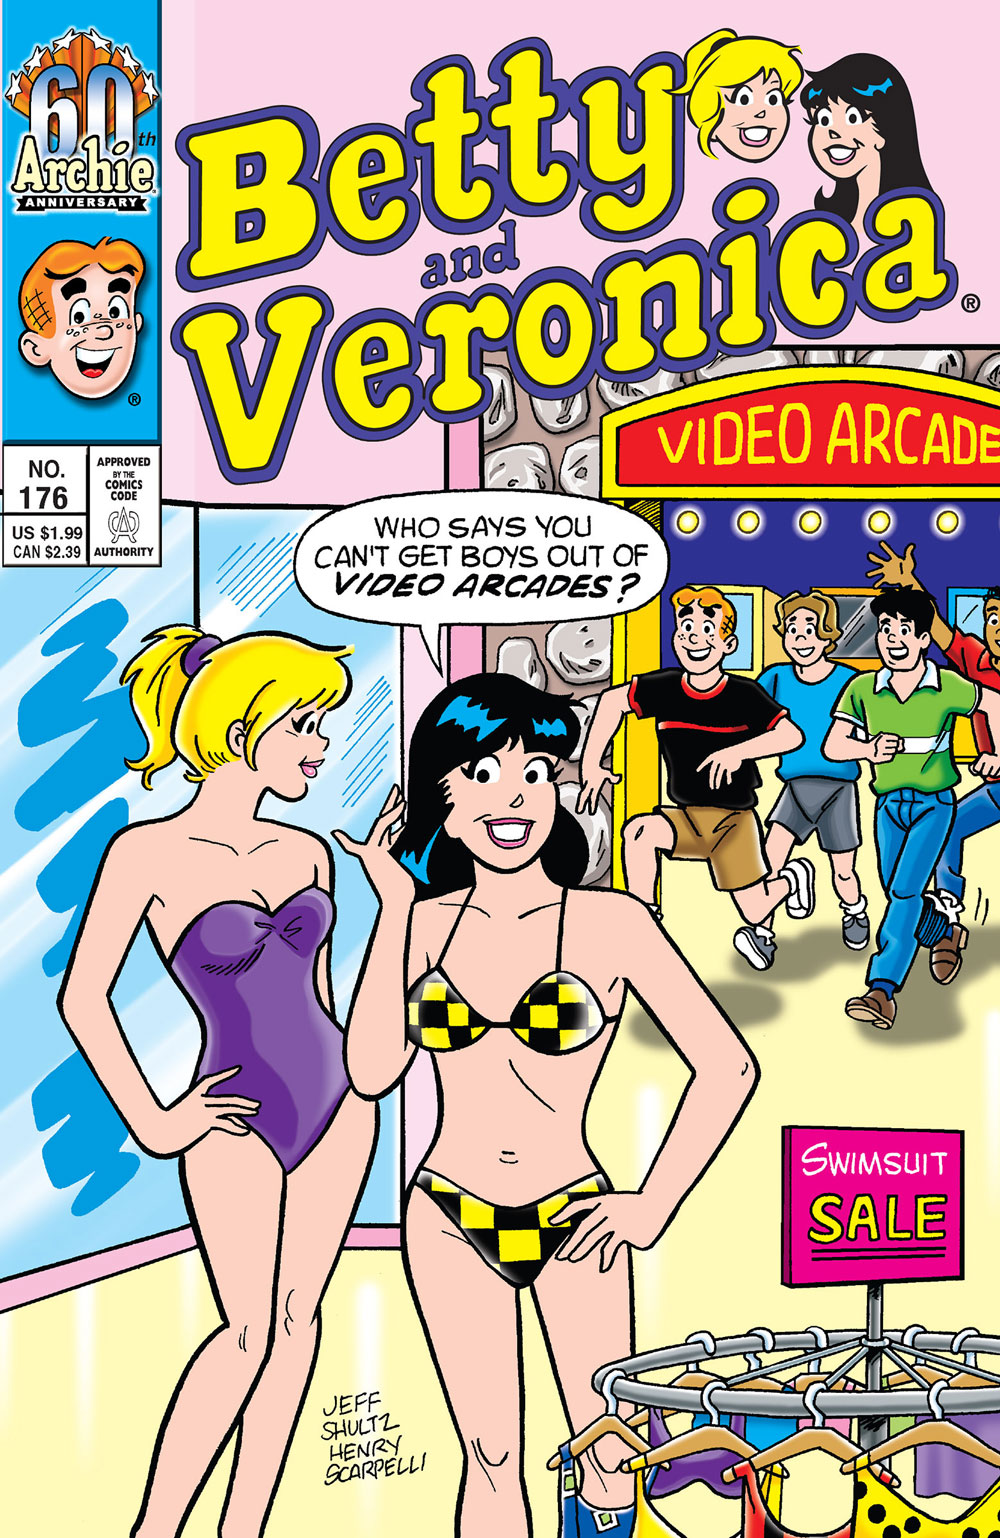 Betty and Veronica stand outside of an arcade in bathing suits, while Archie and other boys run outside towards them. Veronica says she knows a way to get boys out of video arcades.